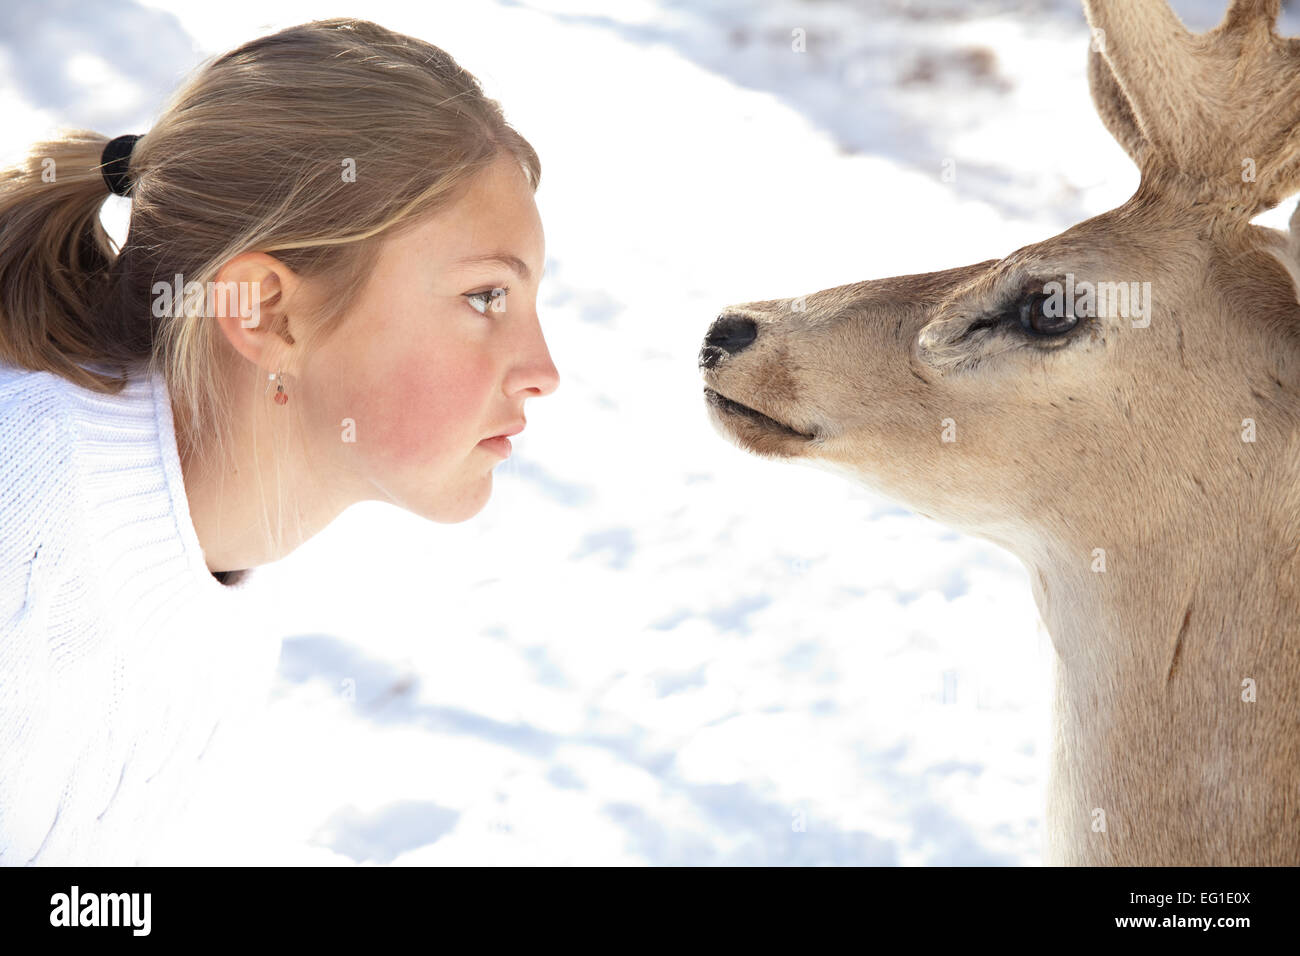 Girl and deer, face to face in snow. Stock Photo